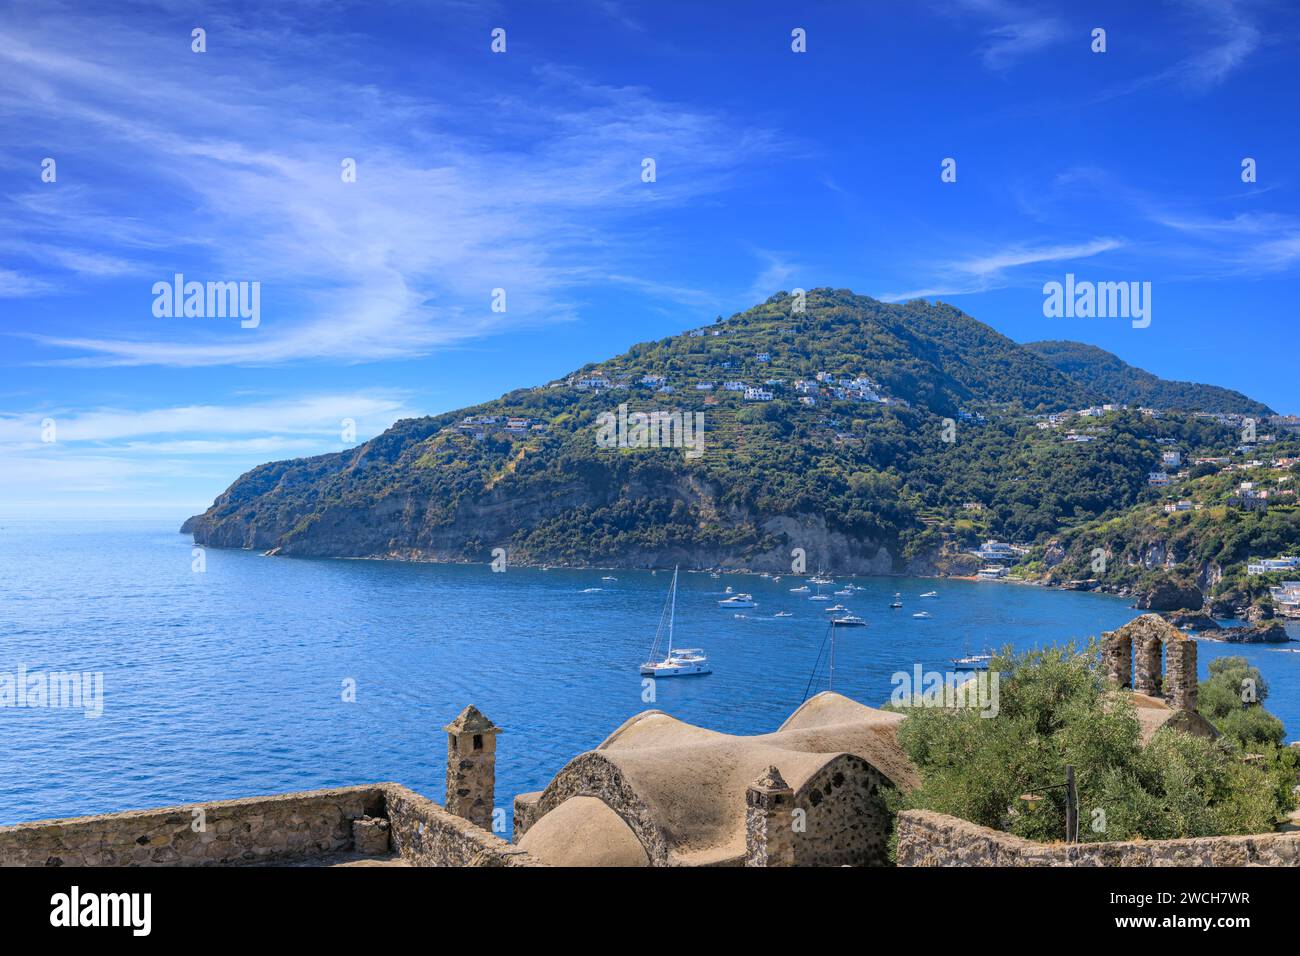 View of the island of Ischia from a suggestive medieval architecture on the Aragonese Castle in Italy. Stock Photo